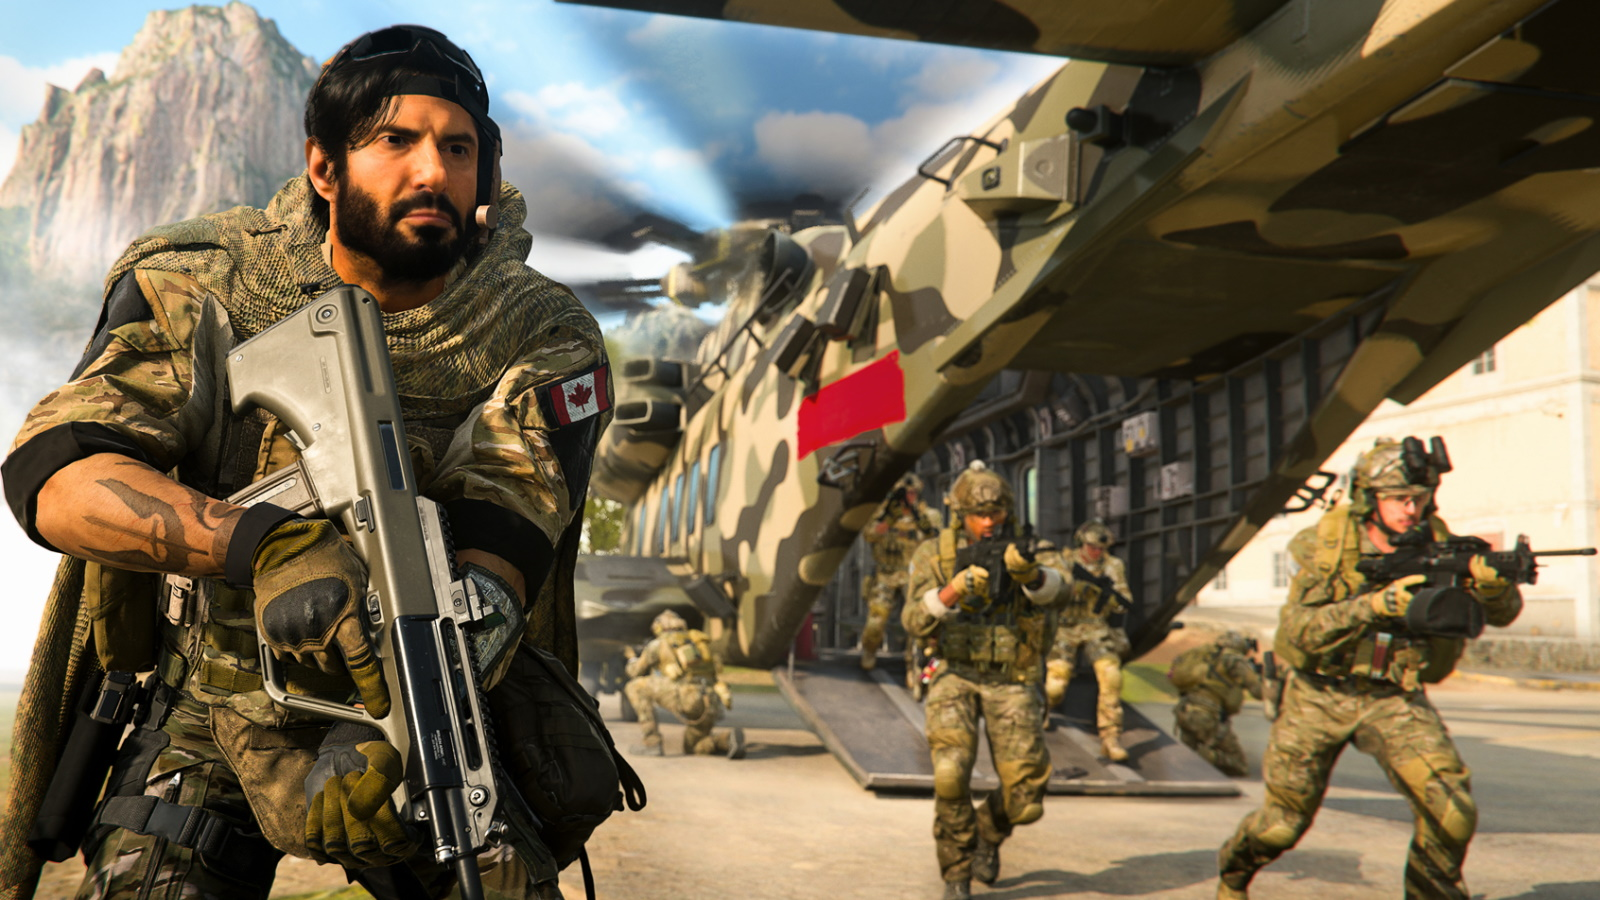 Modern Warfare 2 to introduce 3 new multiplayer modes during open